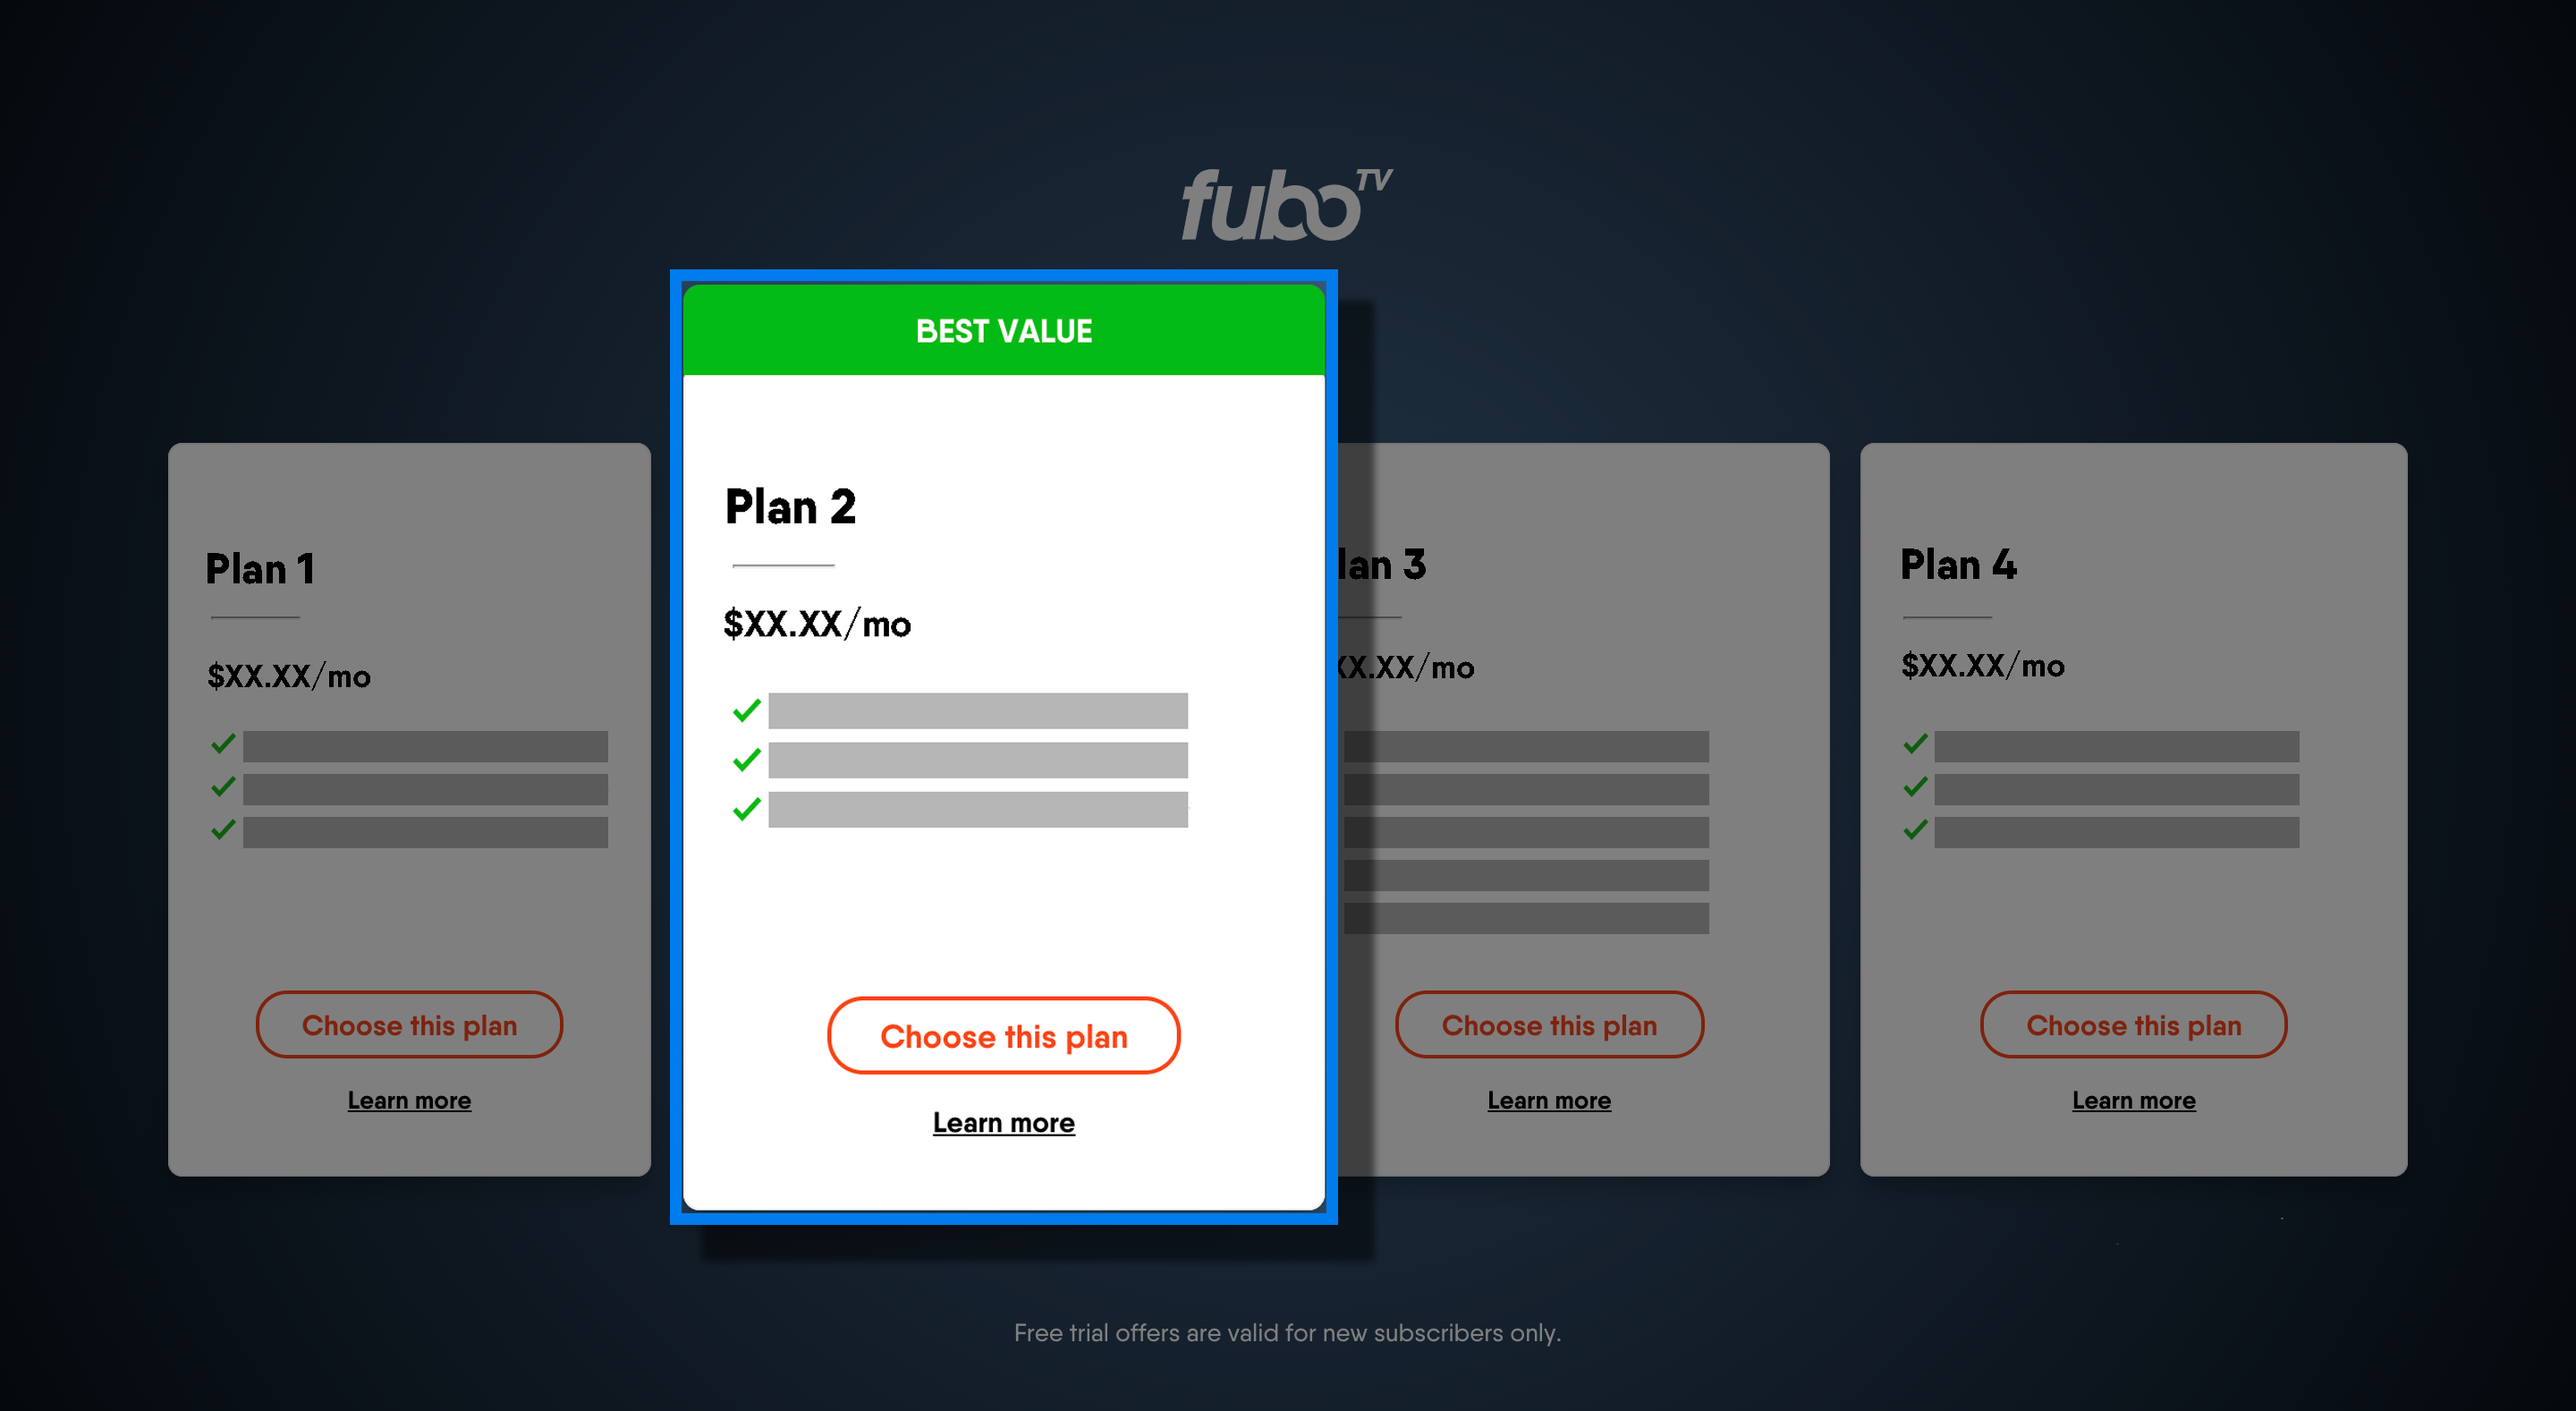 FuboTV generic plan selection page seen when reactivating an account and changing base subscription